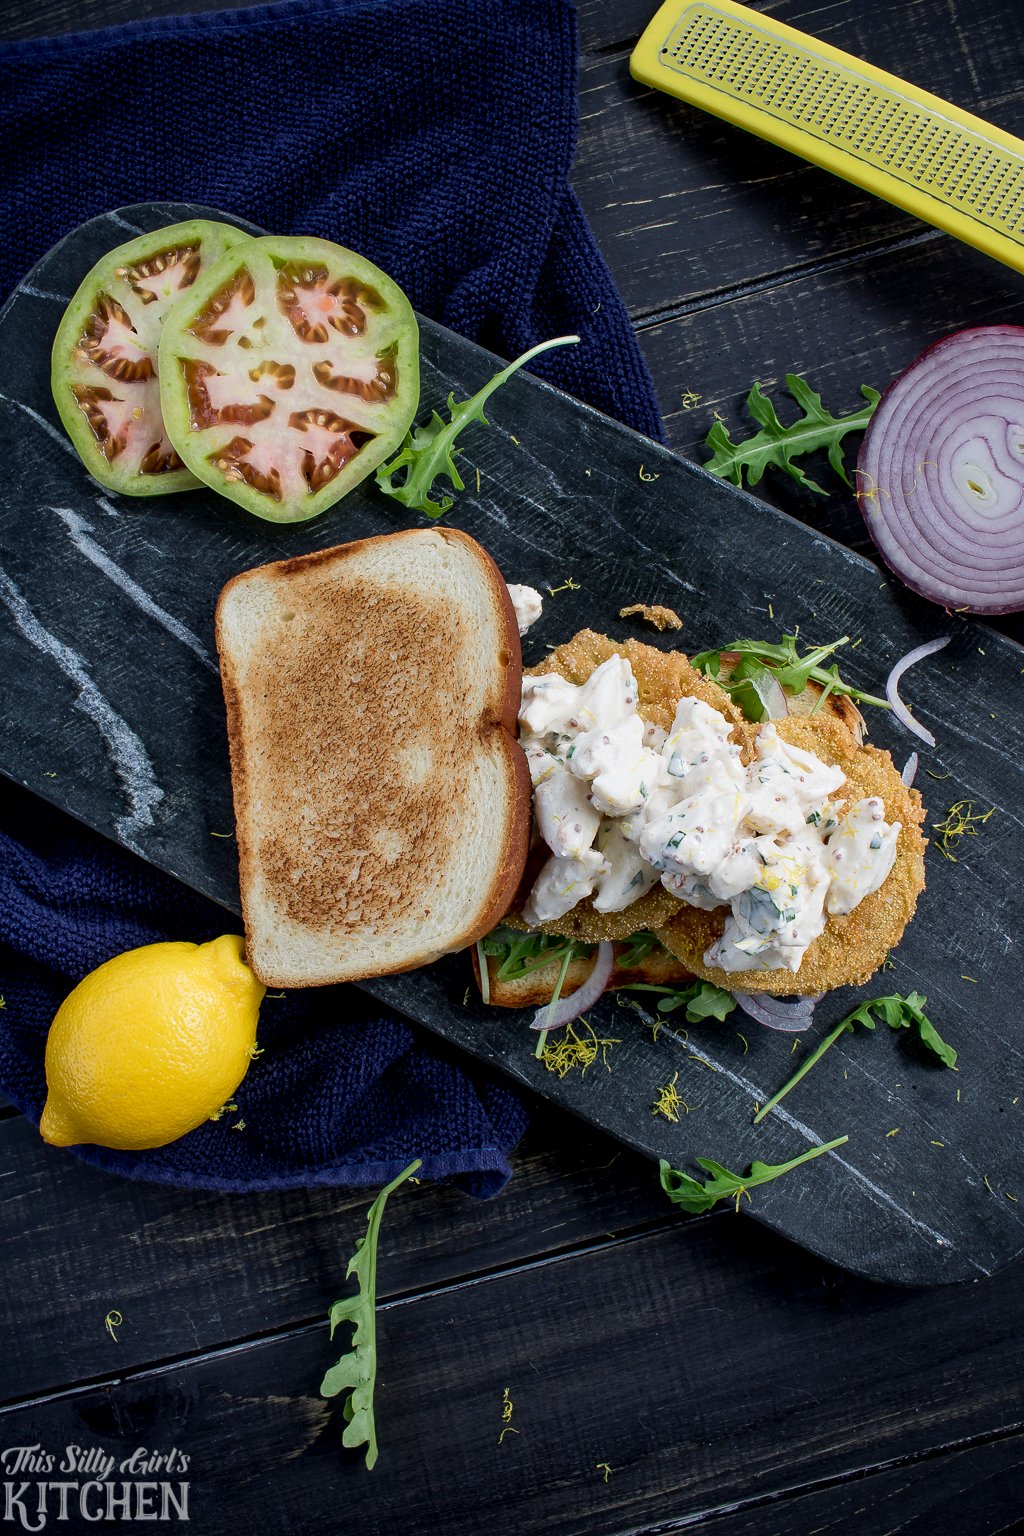 Fried Green Tomato Crab Salad Sandwiches, jumbo lump crab salad over fried green tomatoes, arugula and red onion, all between two slices of bread! Recipe from ThisSillyGirlsKitchen.com